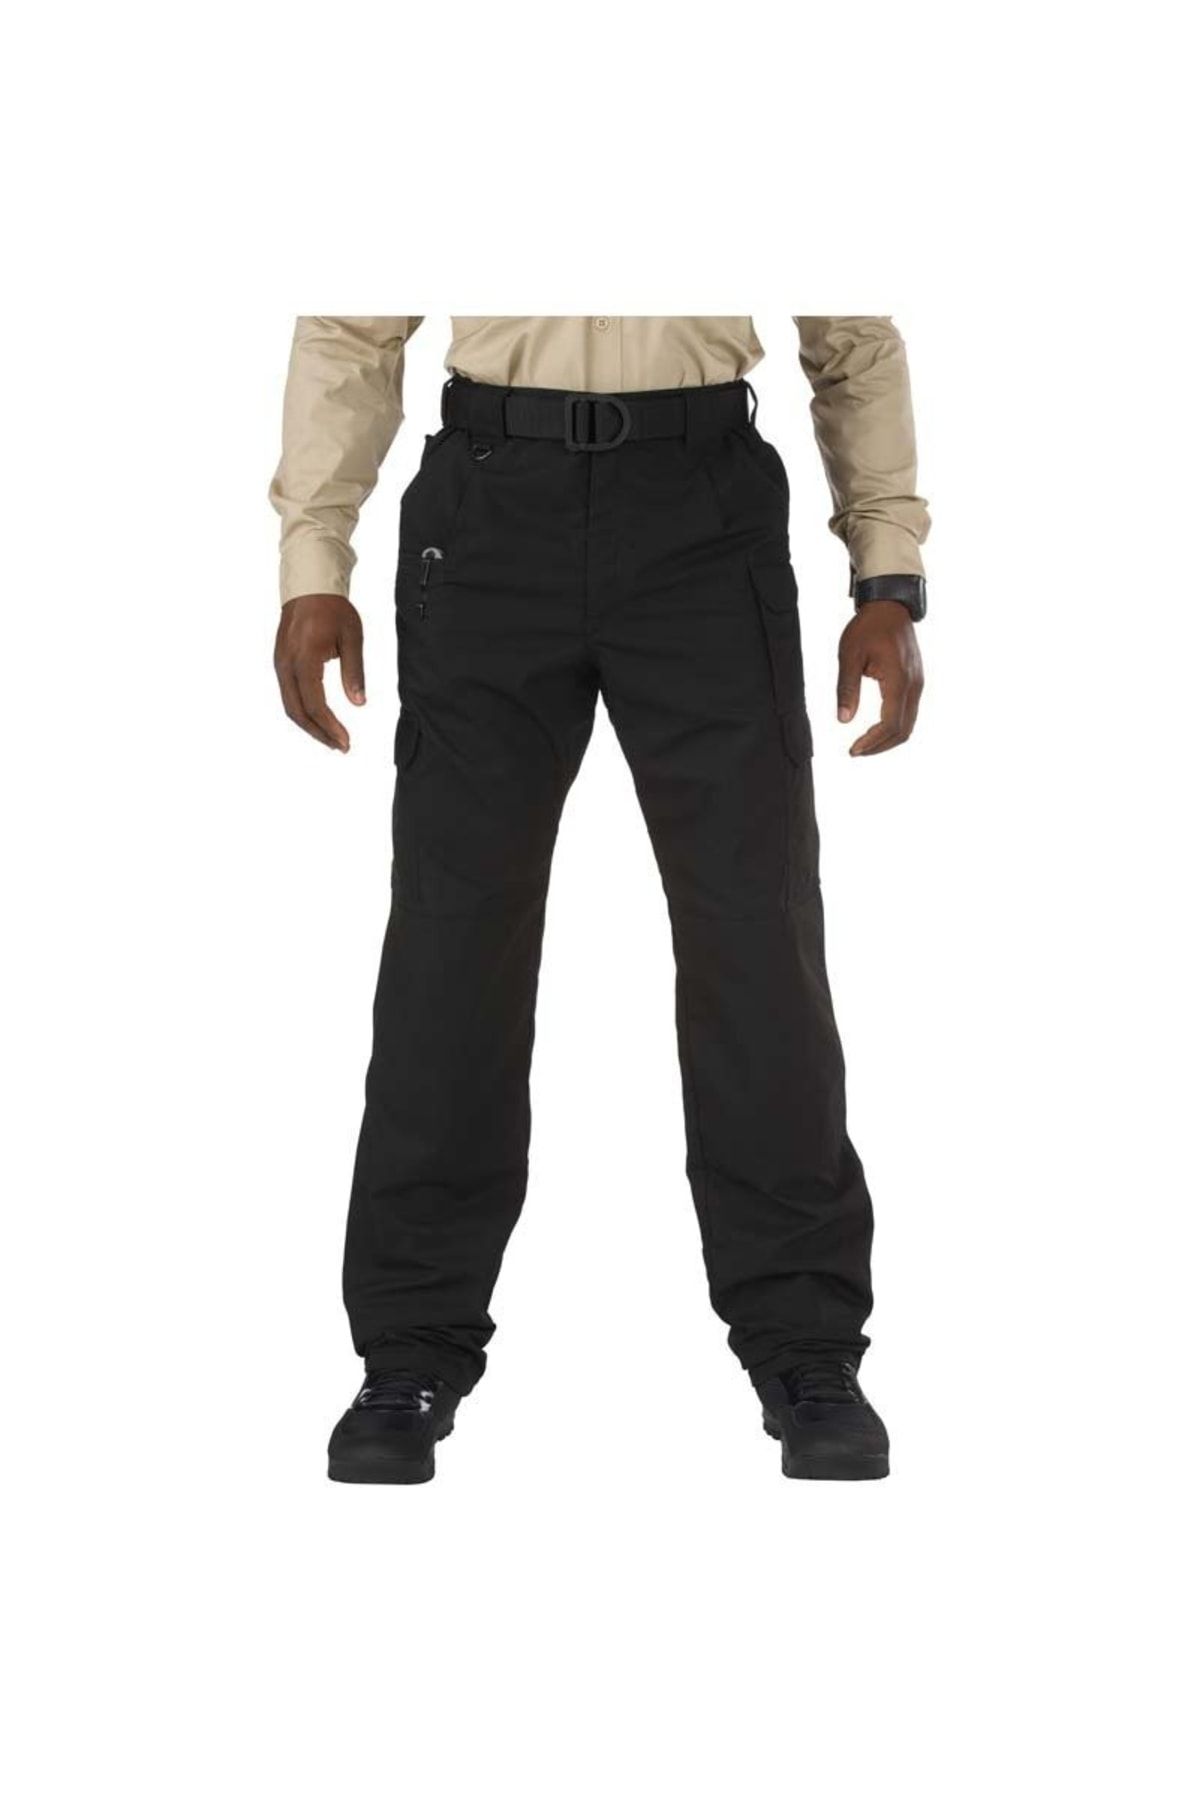 5.11 Tactical Outdoor Tactical Trousers - Trendyol